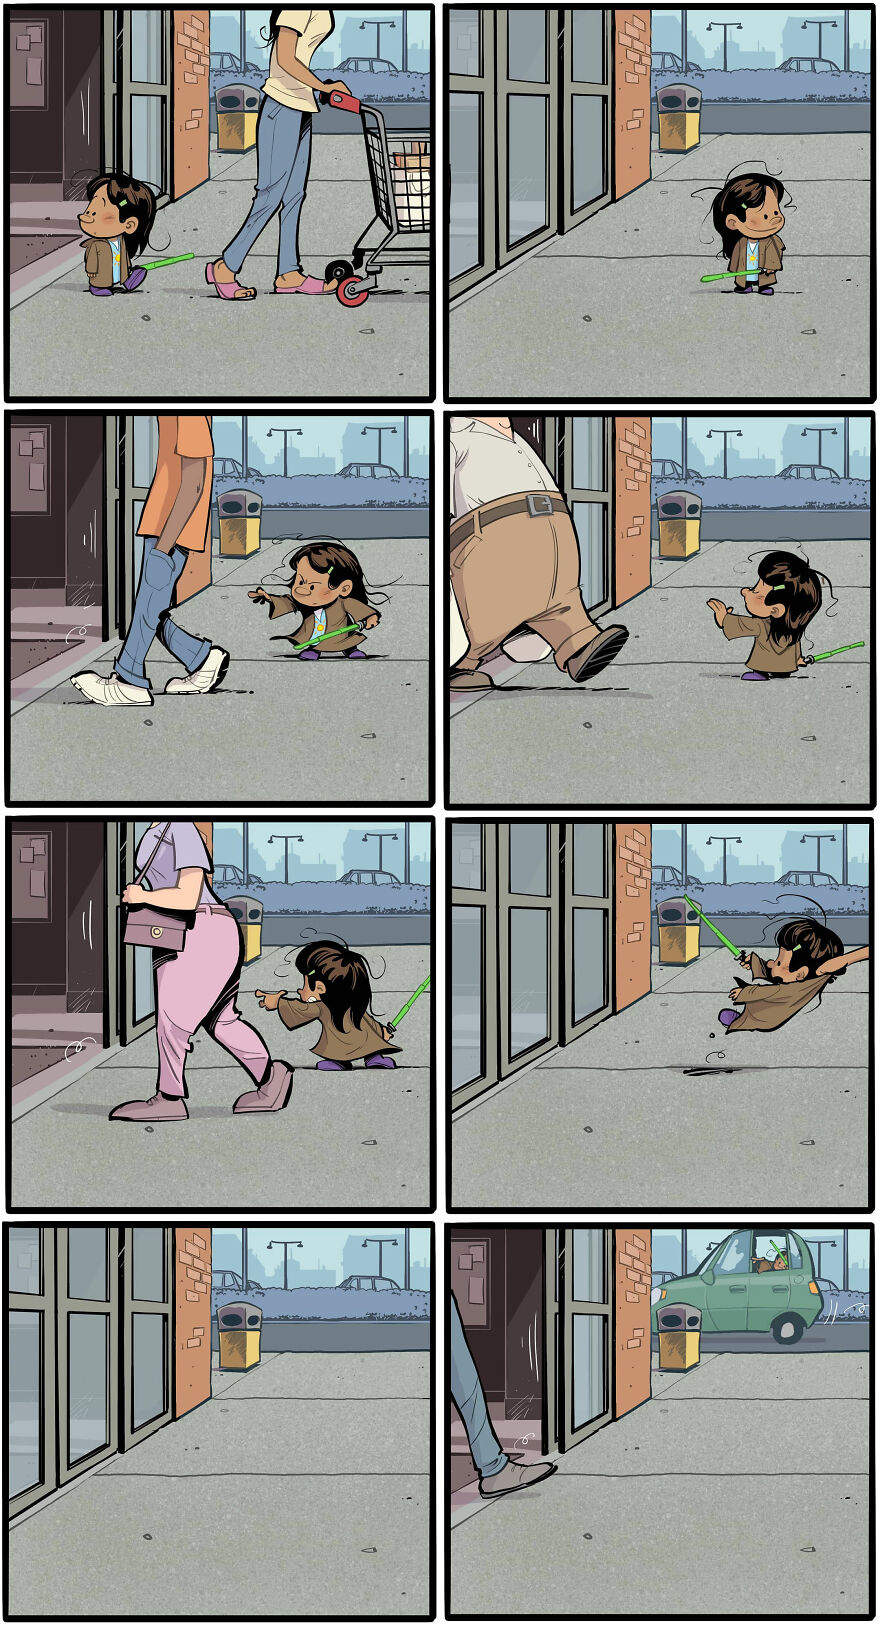 Comics Show In A Creative And Fun Way How A Little Girl Sees Life